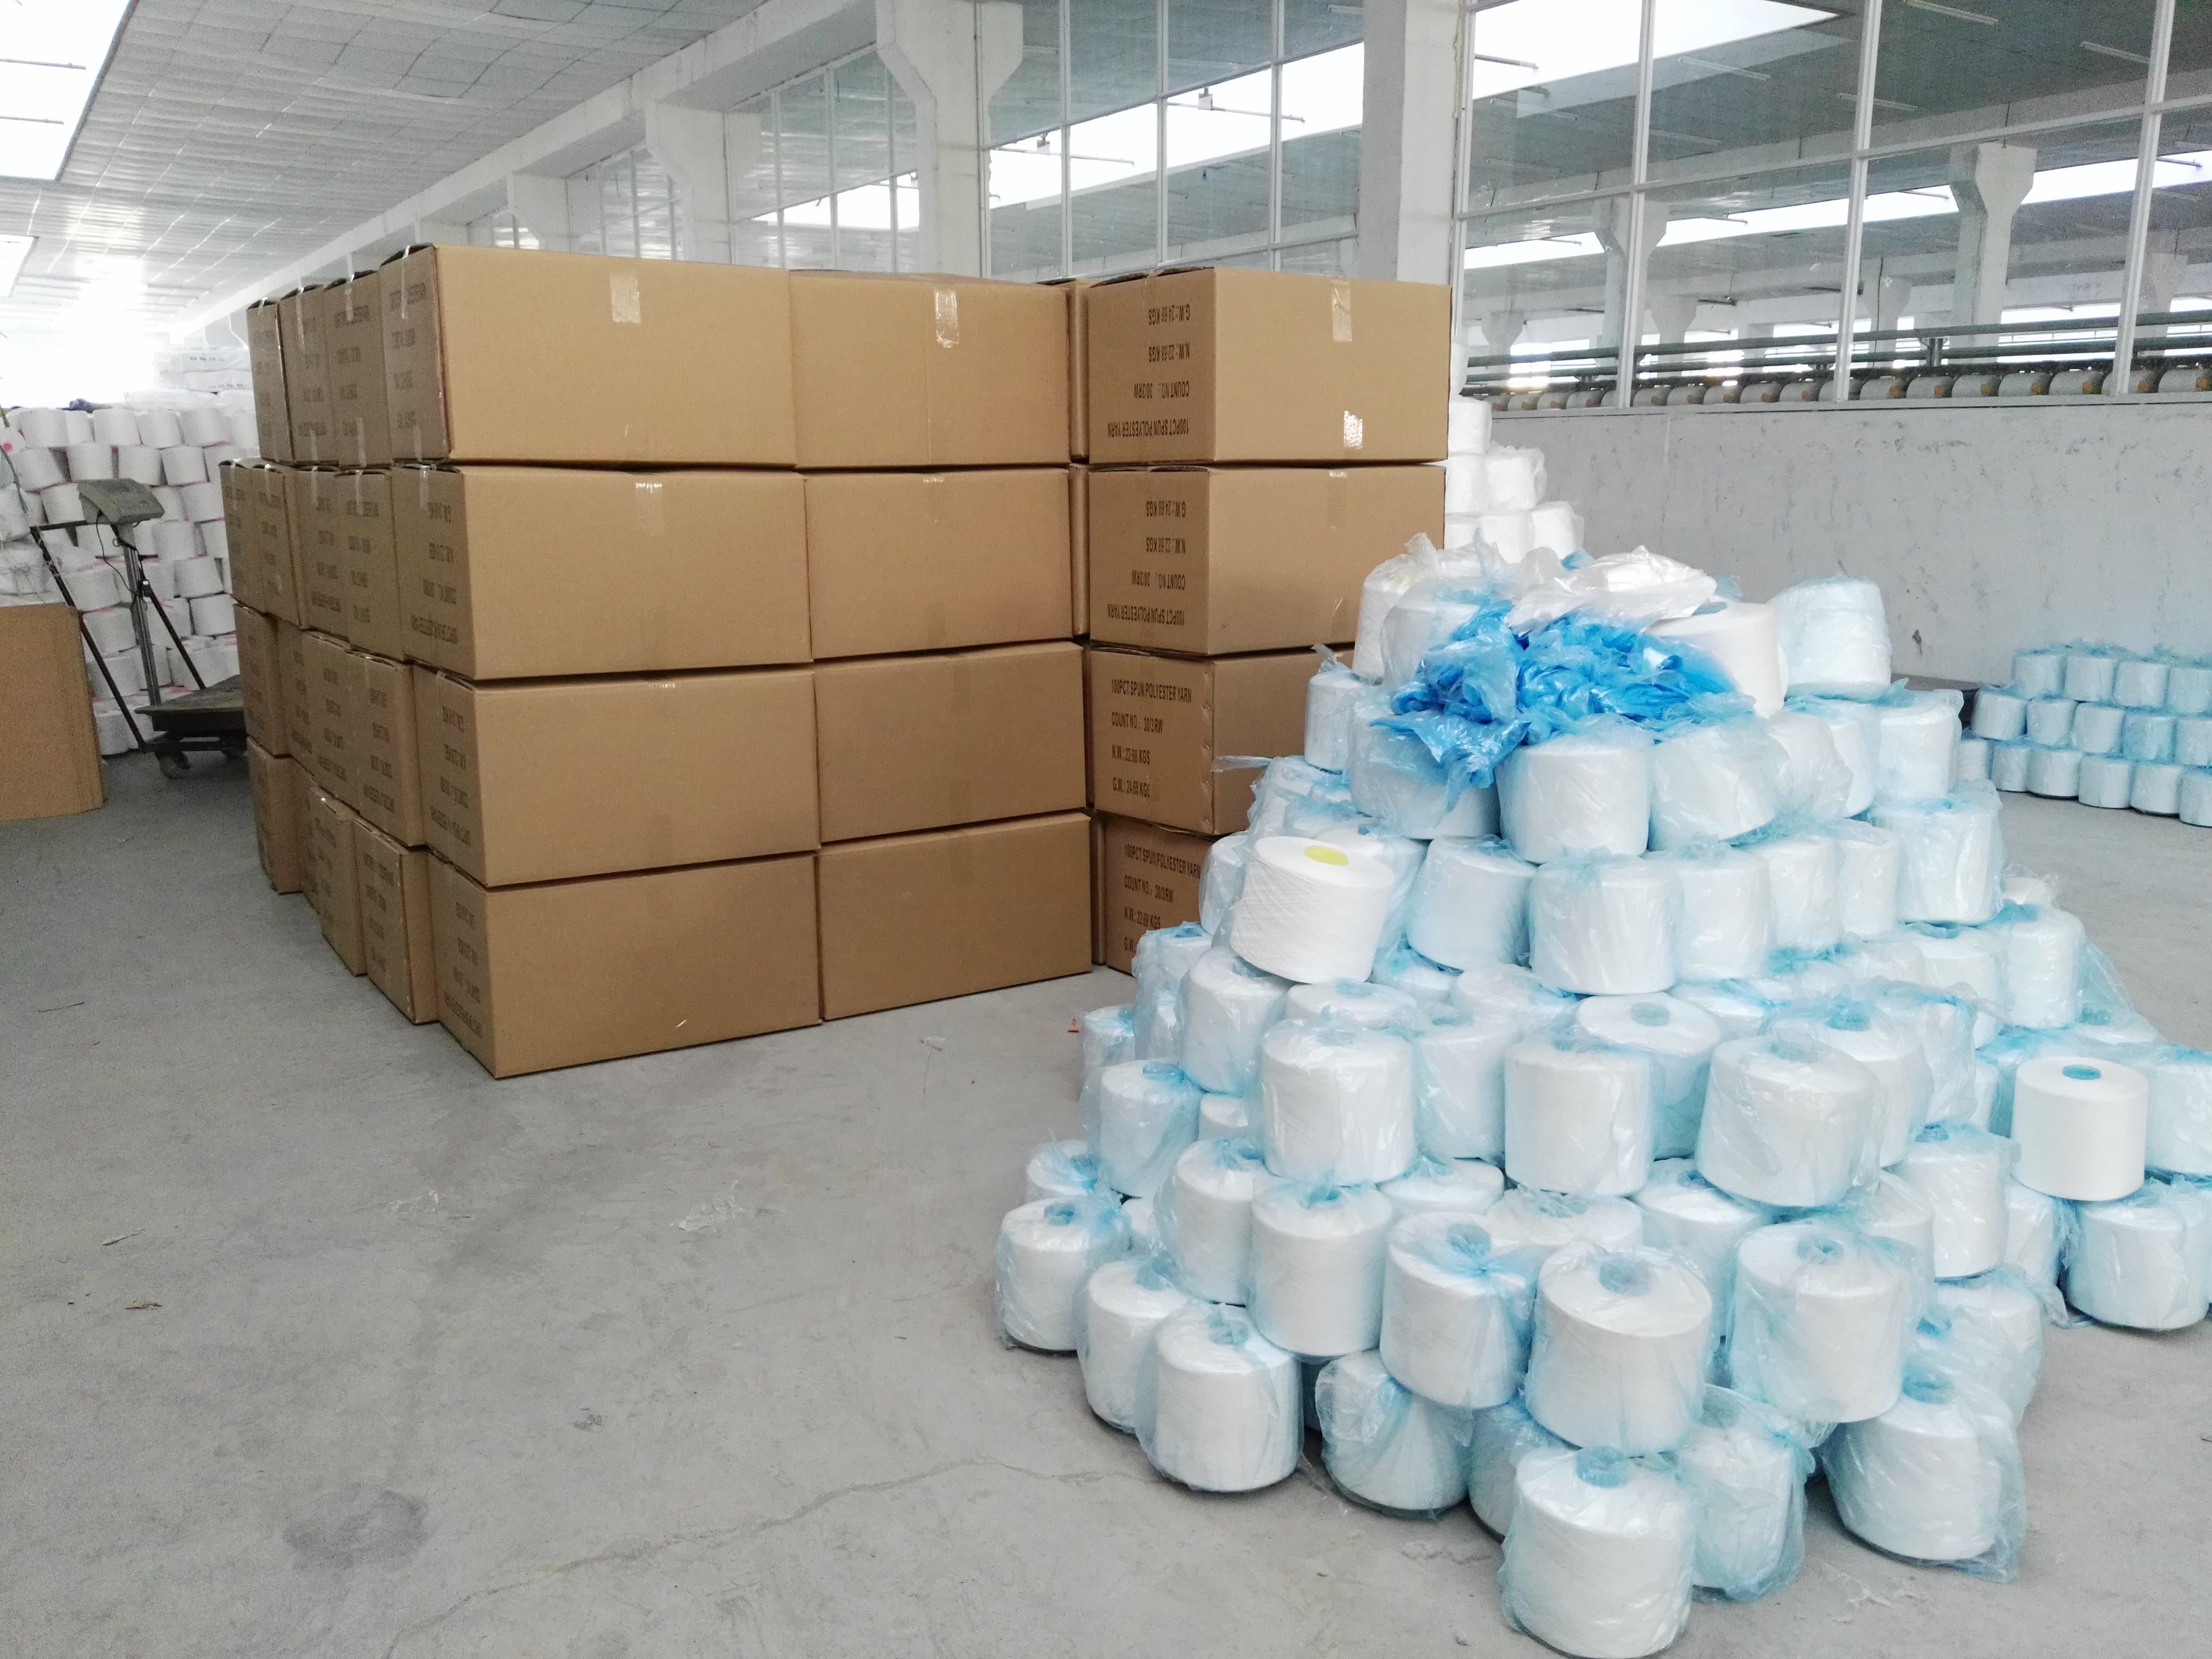 HUBEI MEGA GOLD IMPORT AND EXPORT CO.,LTD-A LEADING SUPPLIER OF POLYESTER YARN!